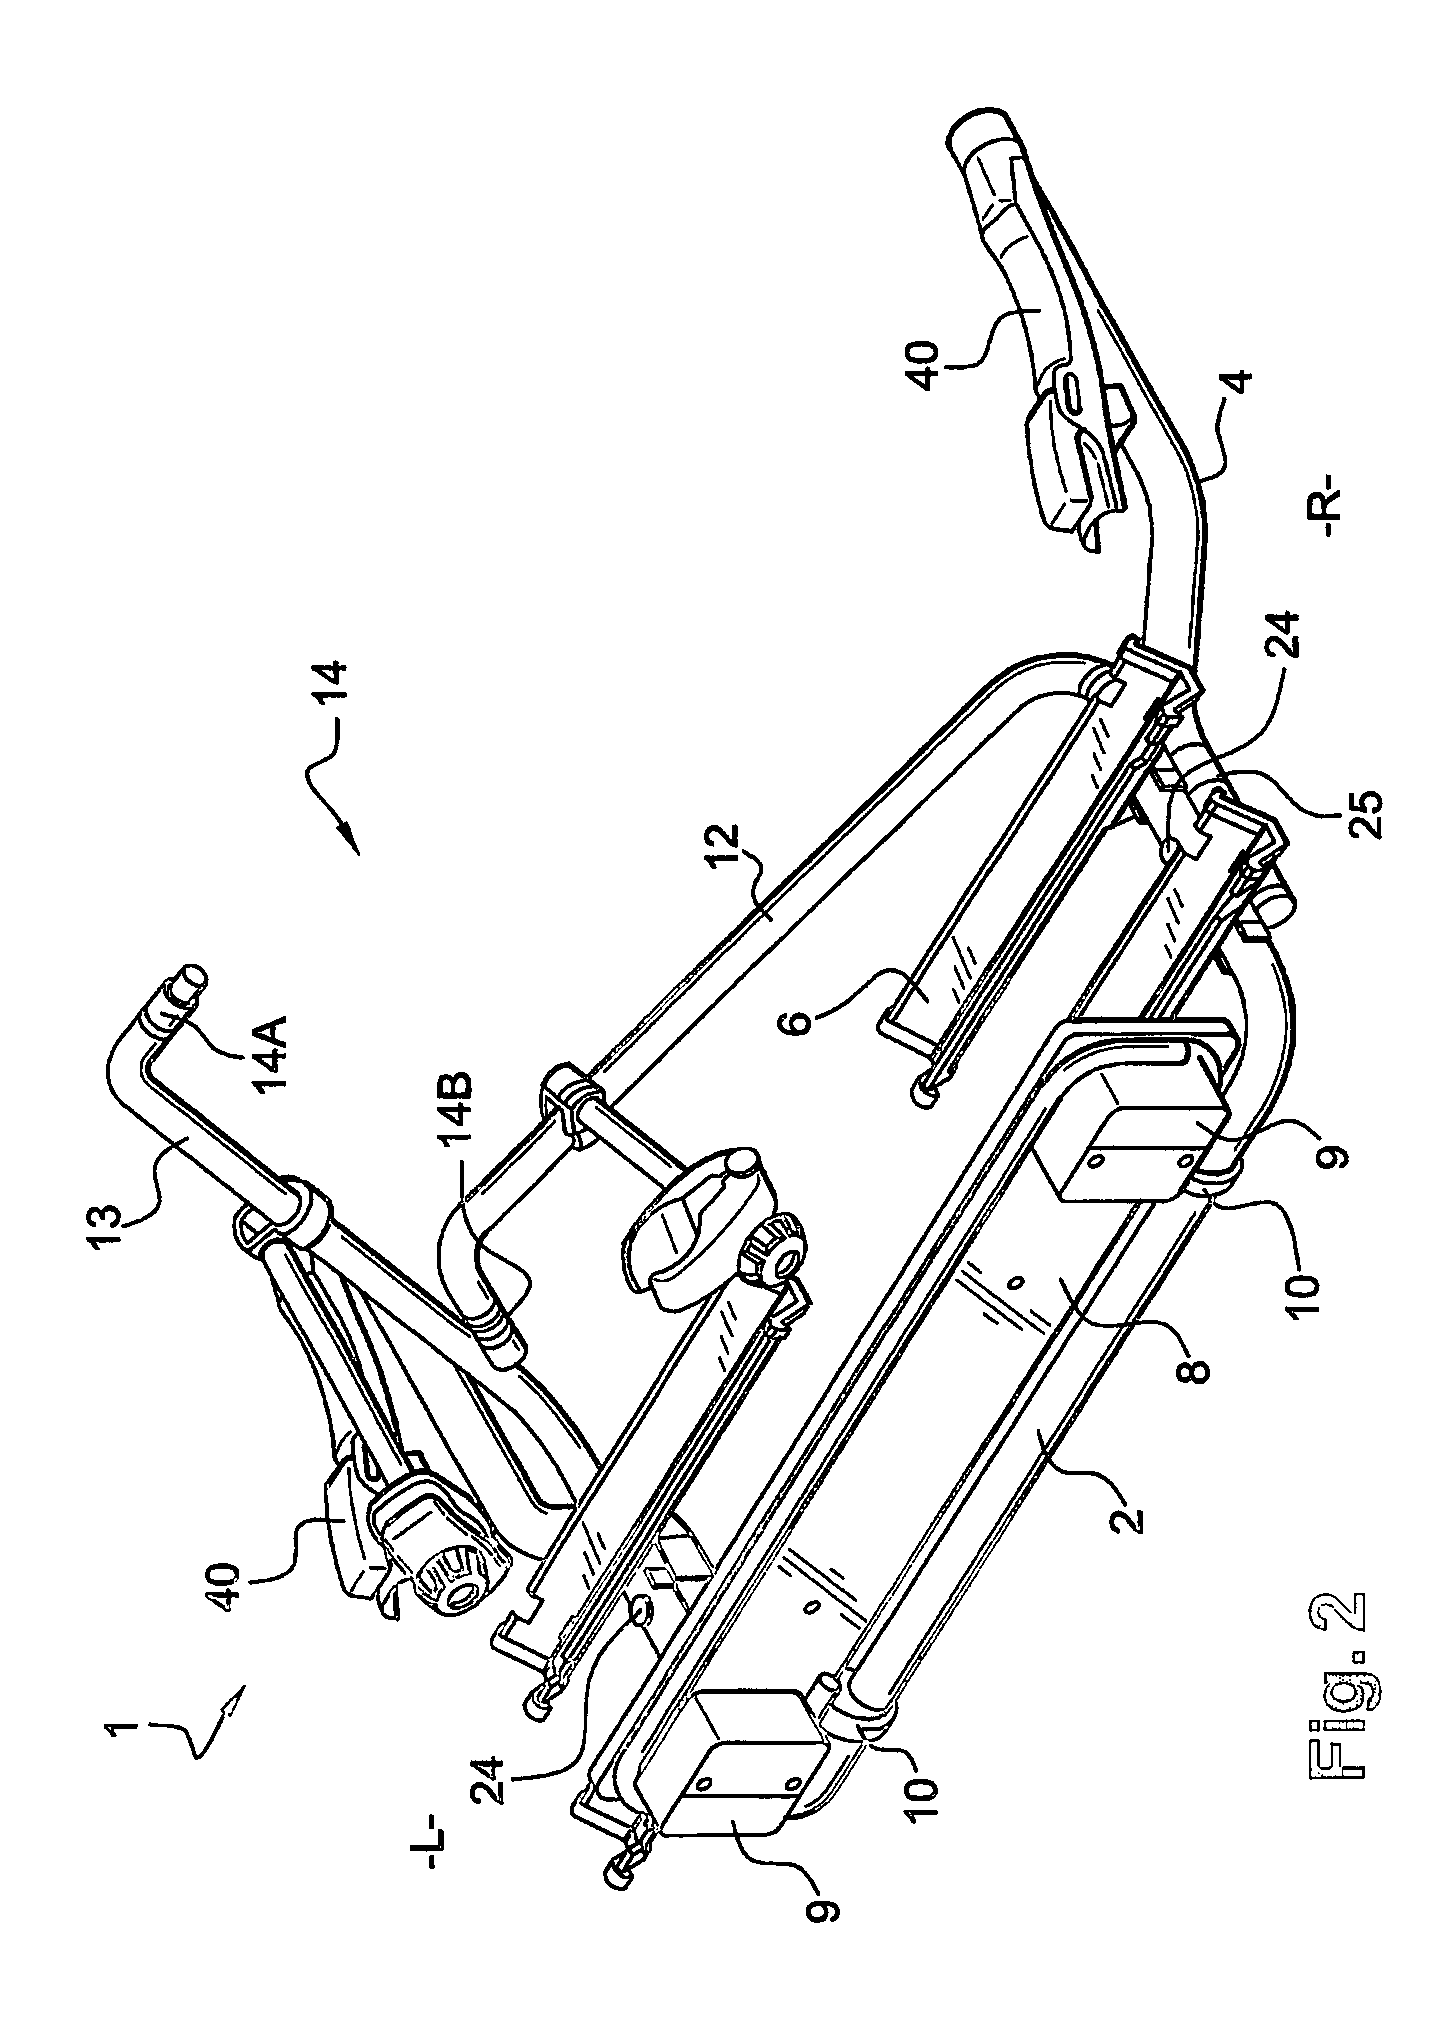 Load carriers for vehicles